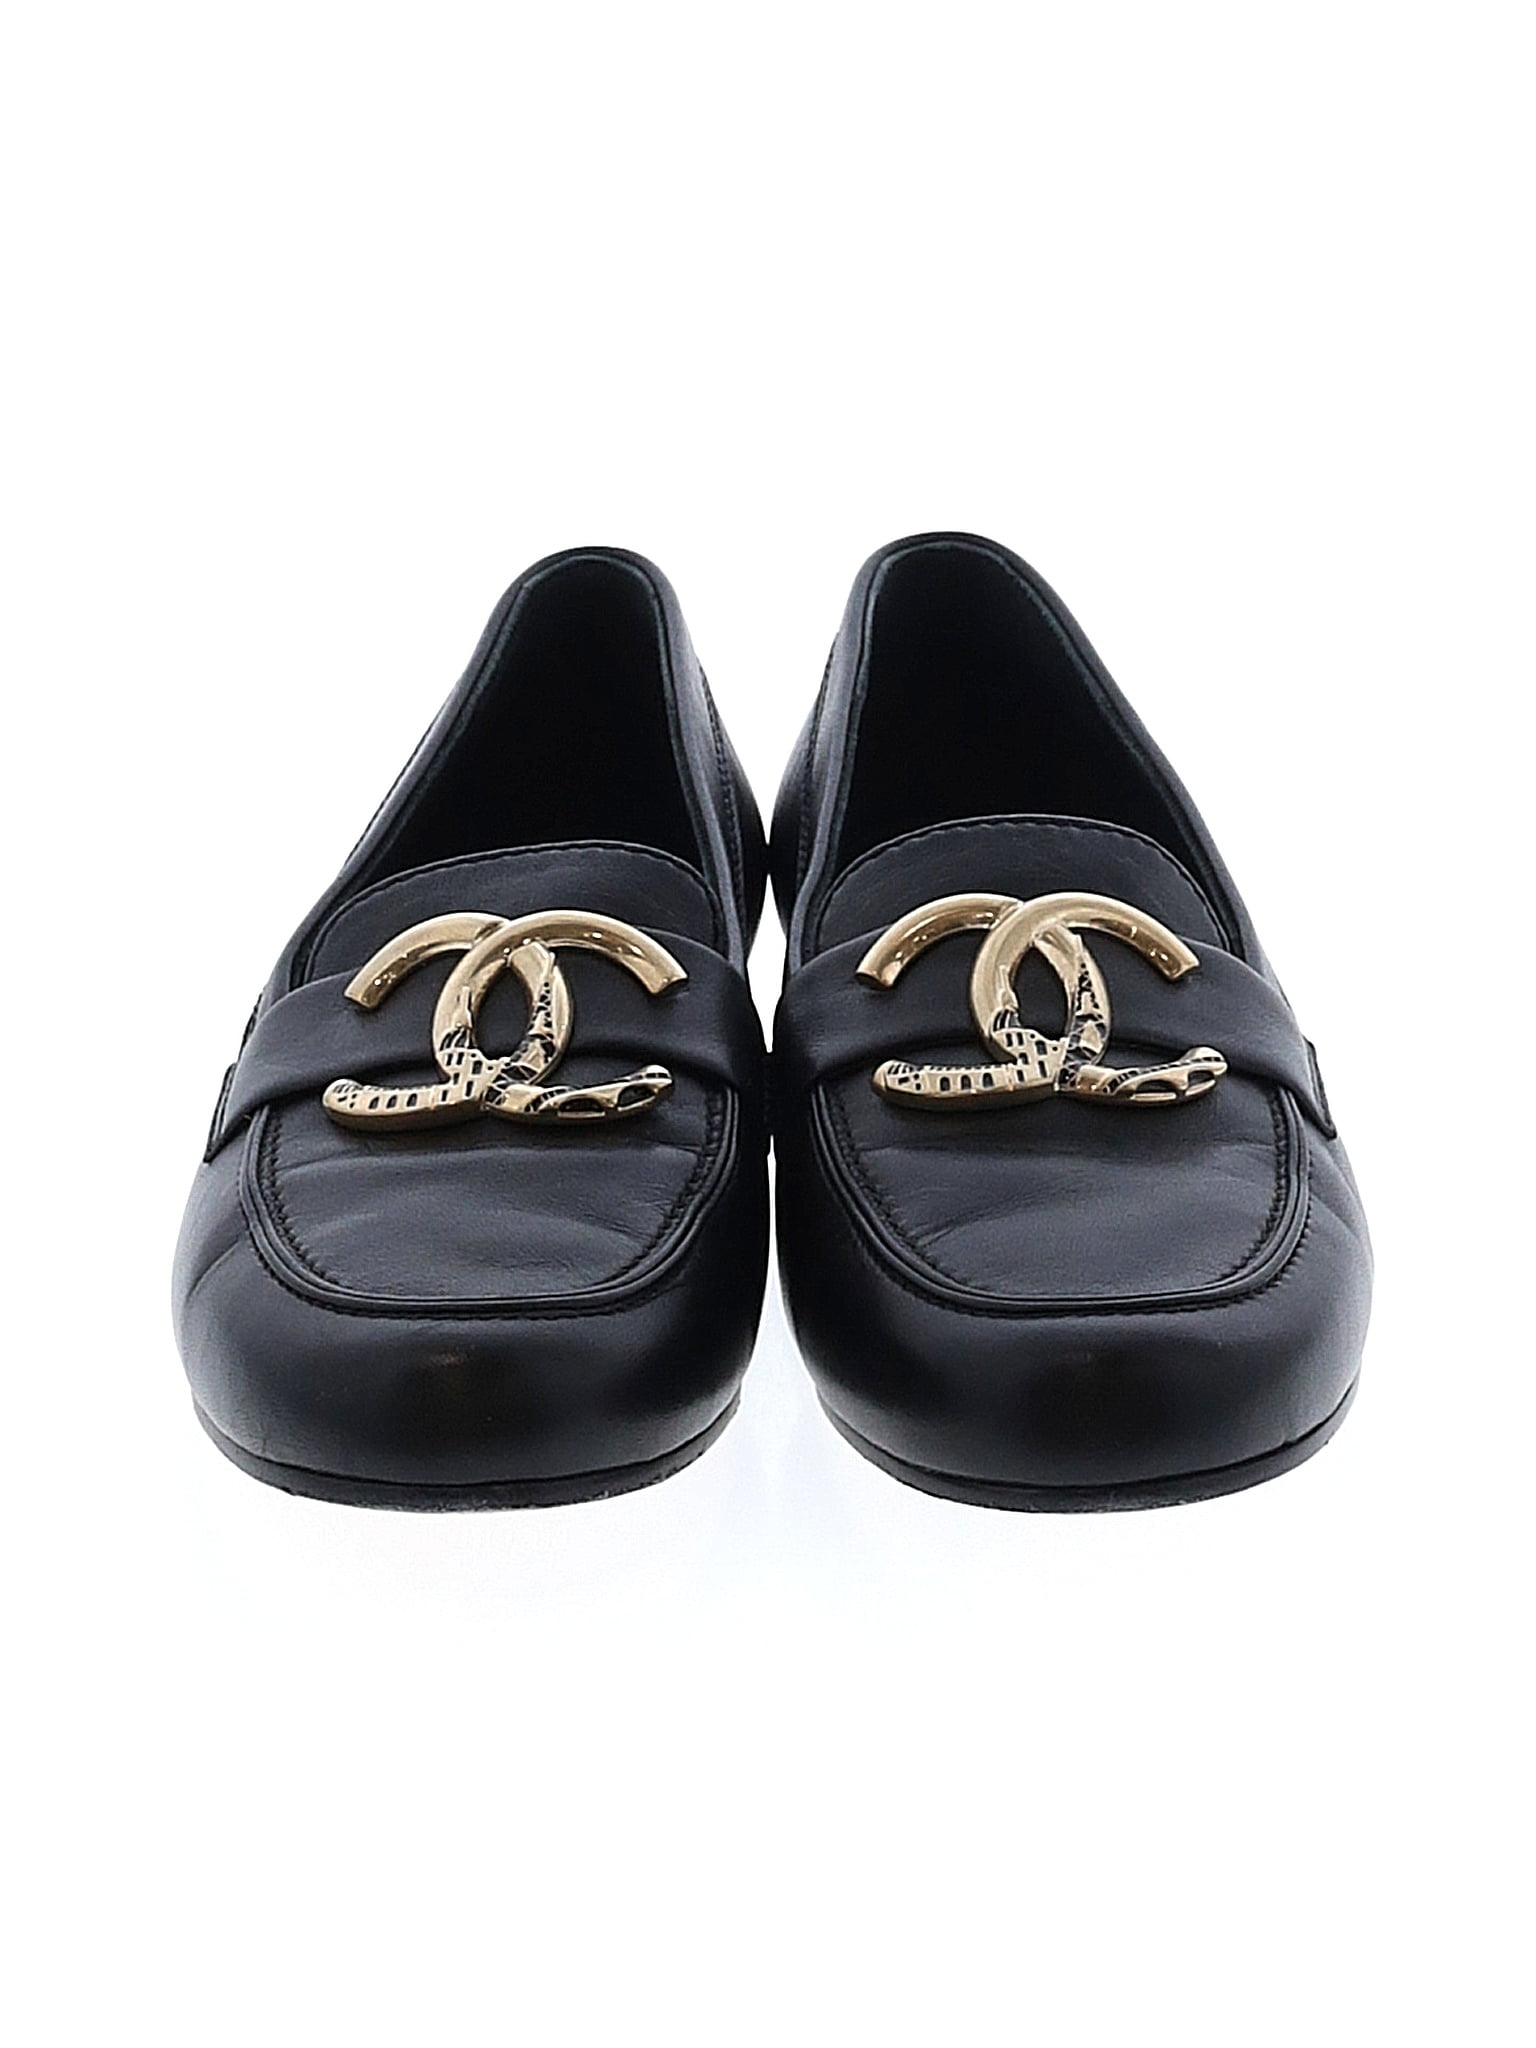 Chanel Solid Black Leather CC Loafers Size 35 (EU) - 38% off